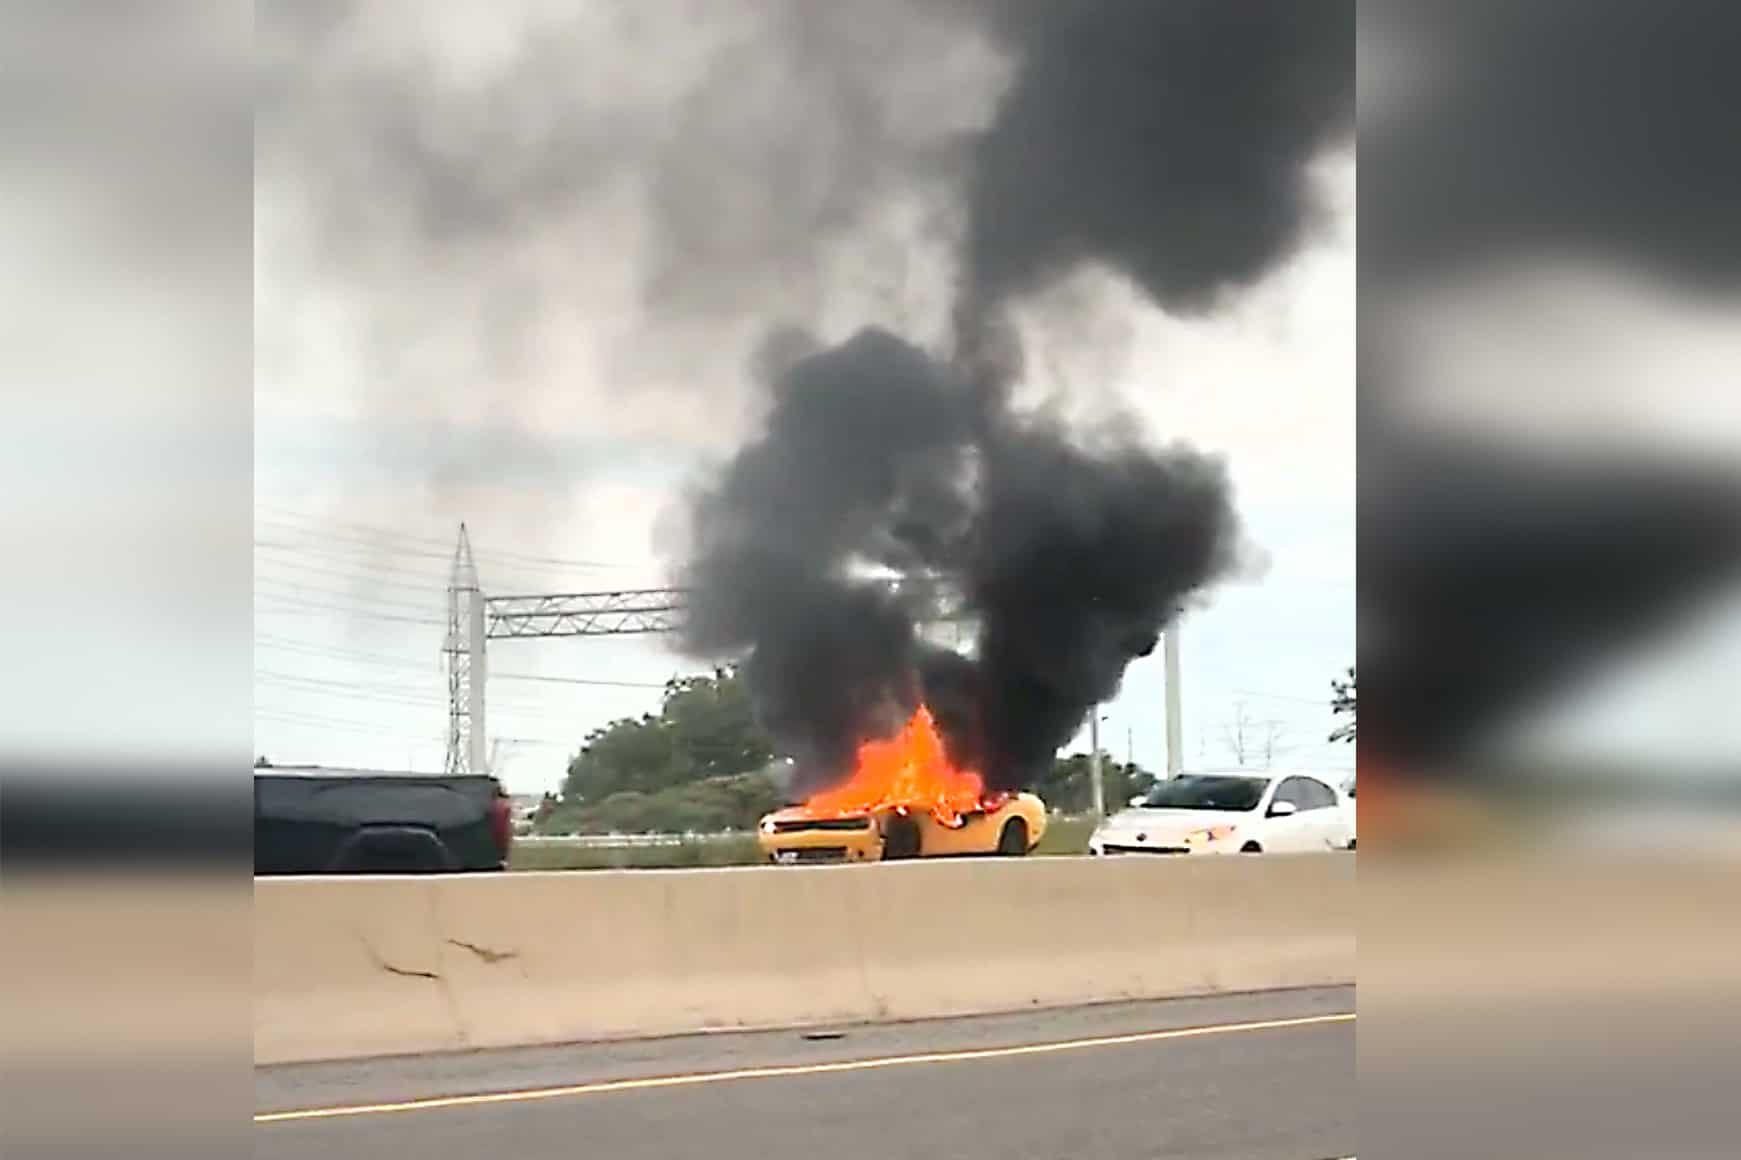 hwy 403 vehicle fire mississauga